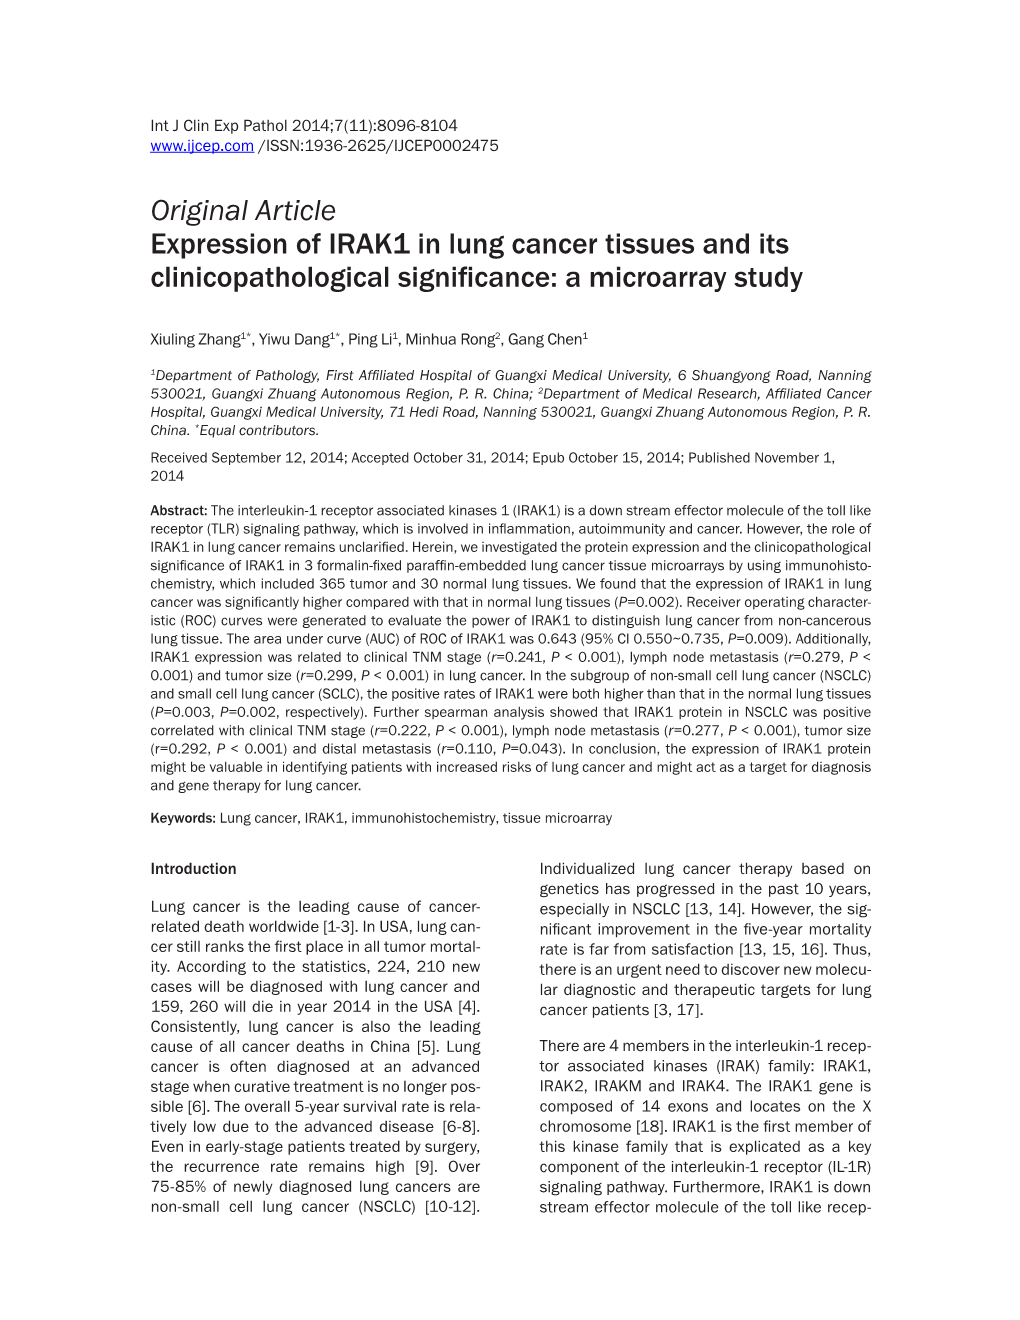 Original Article Expression of IRAK1 in Lung Cancer Tissues and Its Clinicopathological Significance: a Microarray Study